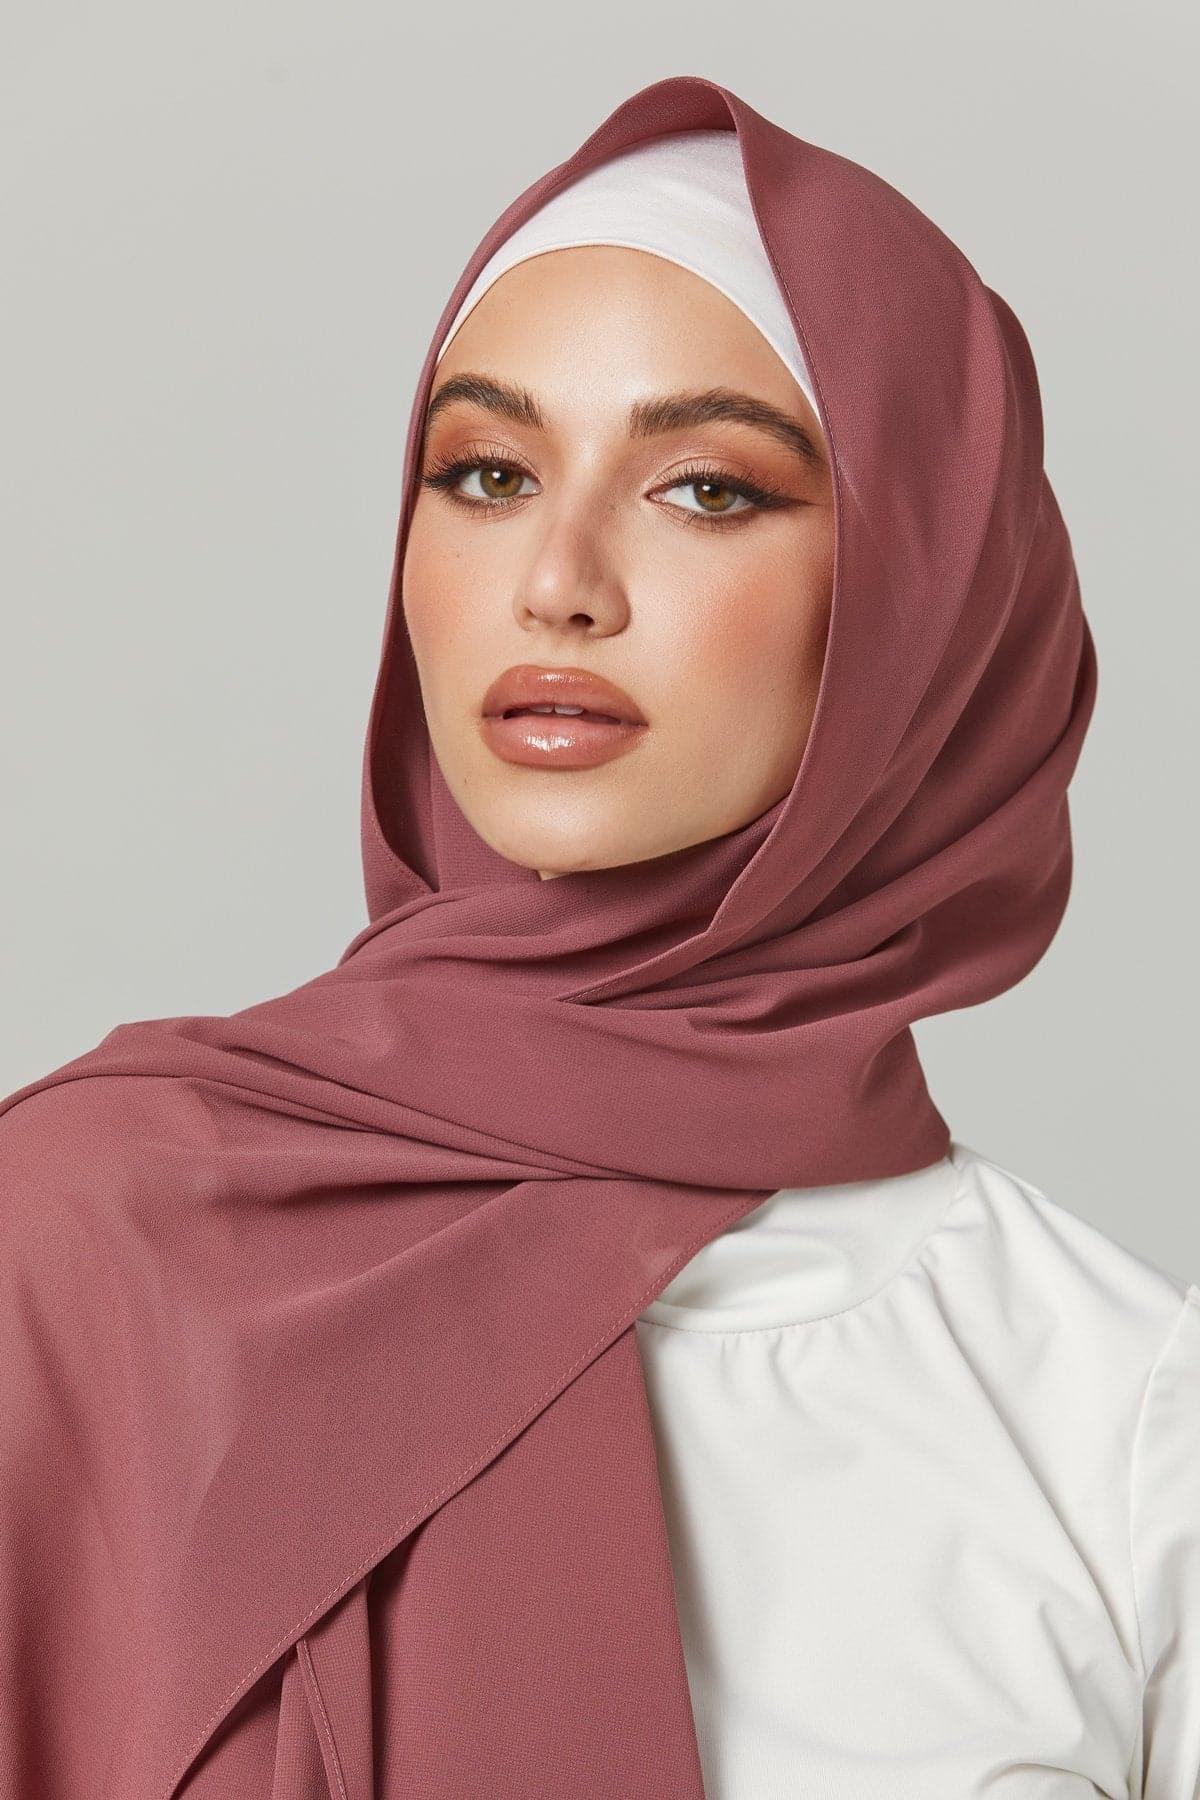 HH EXCLUSIVE // Sarah assembles the Hijab Stand. The new way to organi, any hijab collection